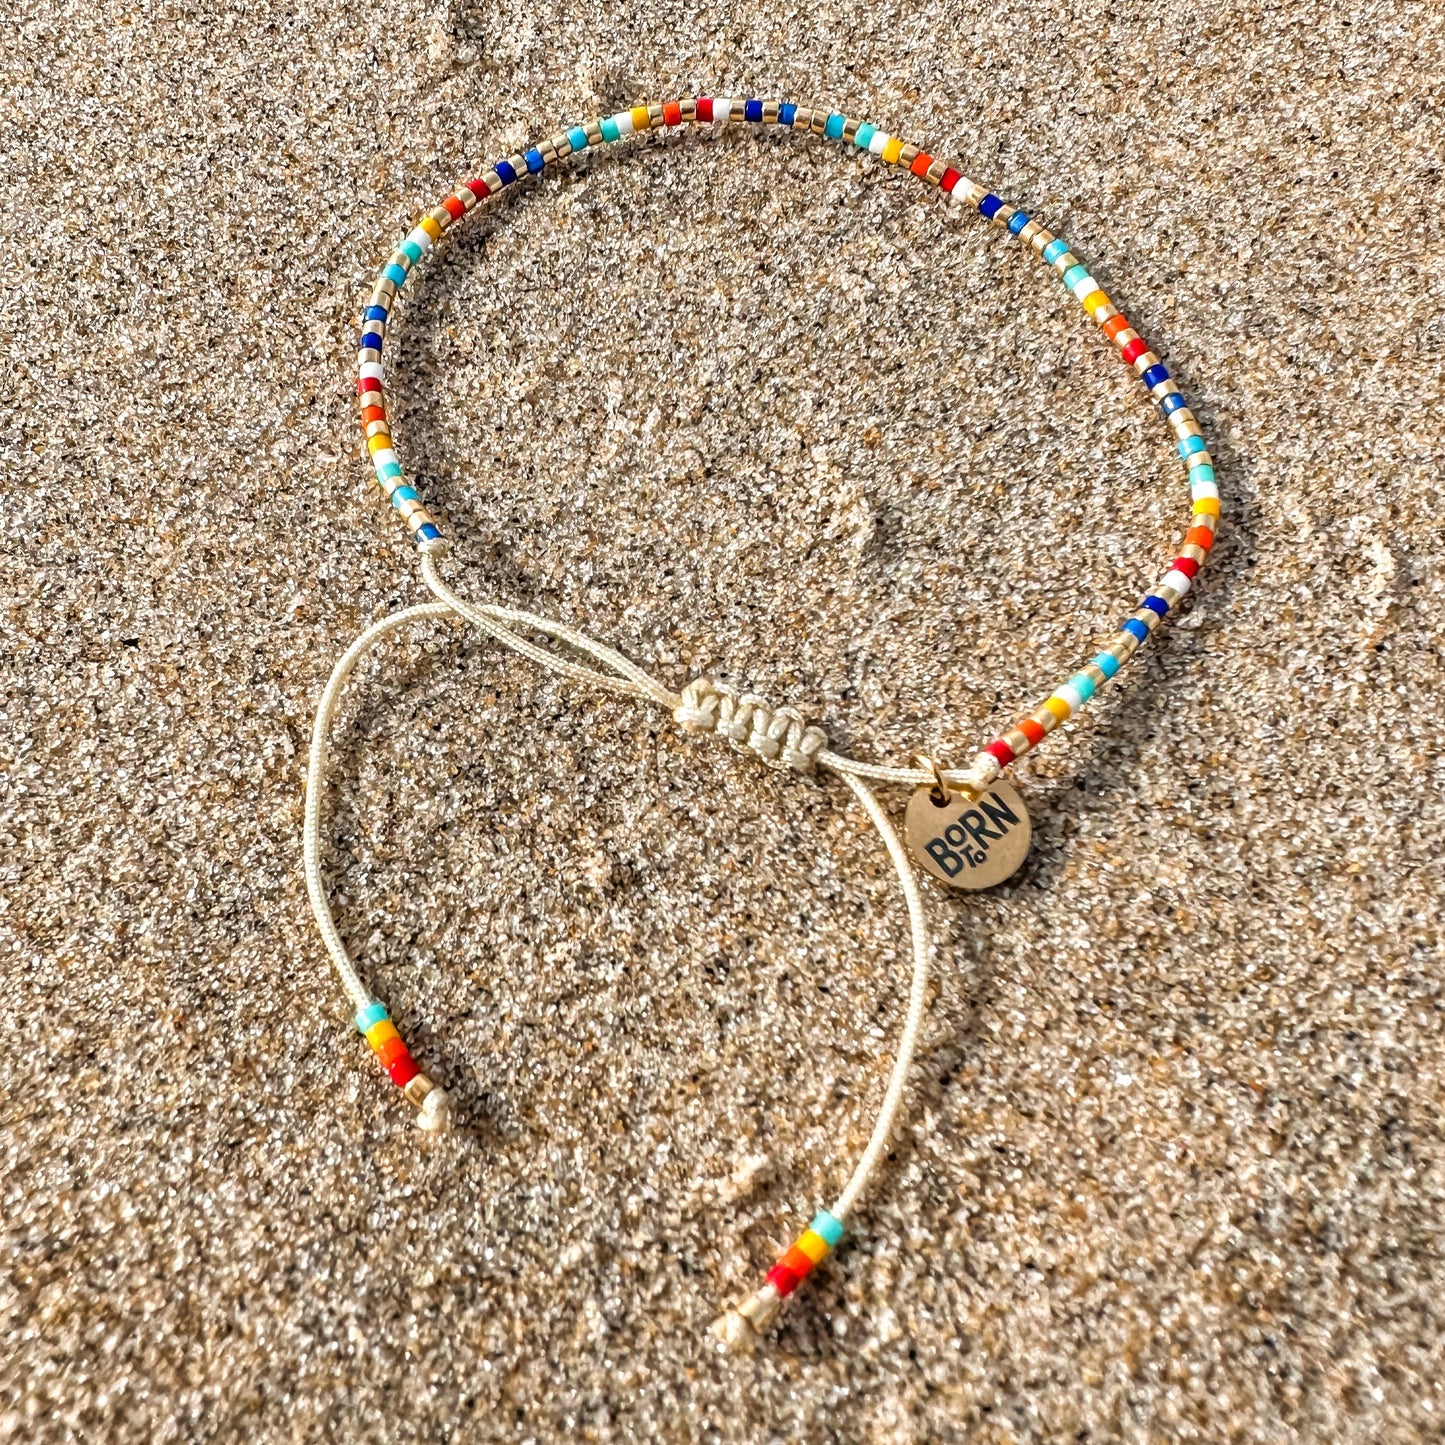 Beaded bracelet, adjustable bracelet made with colored beads, friendship bracelet, Surf Jewelry made by Born to Rock Jewelry, Family owned sports inspired and lifestyle jewelry brand based in San Diego, California